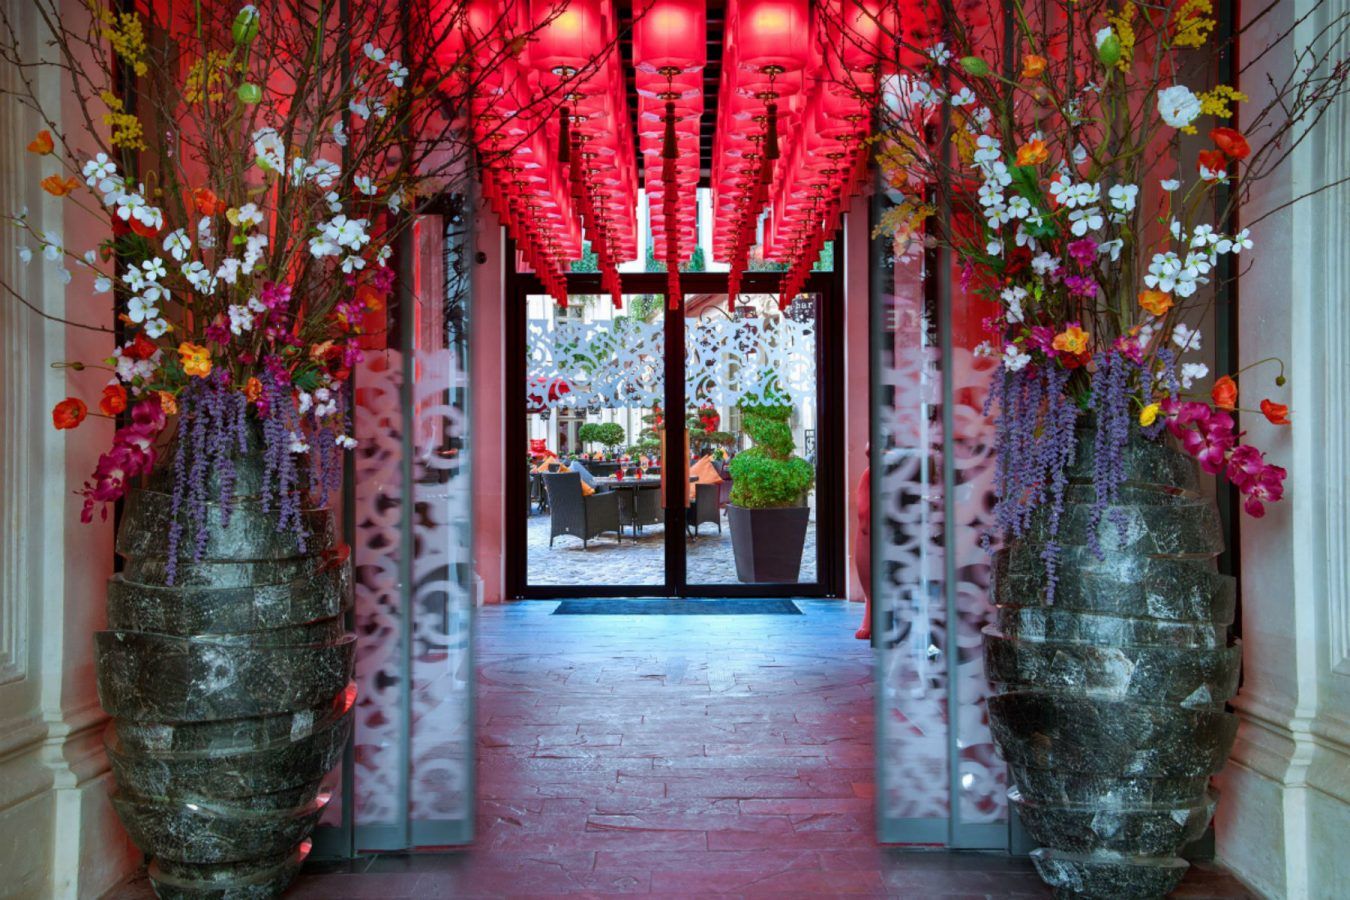 4 amazing hotels in Europe inspired by Asian design and architecture